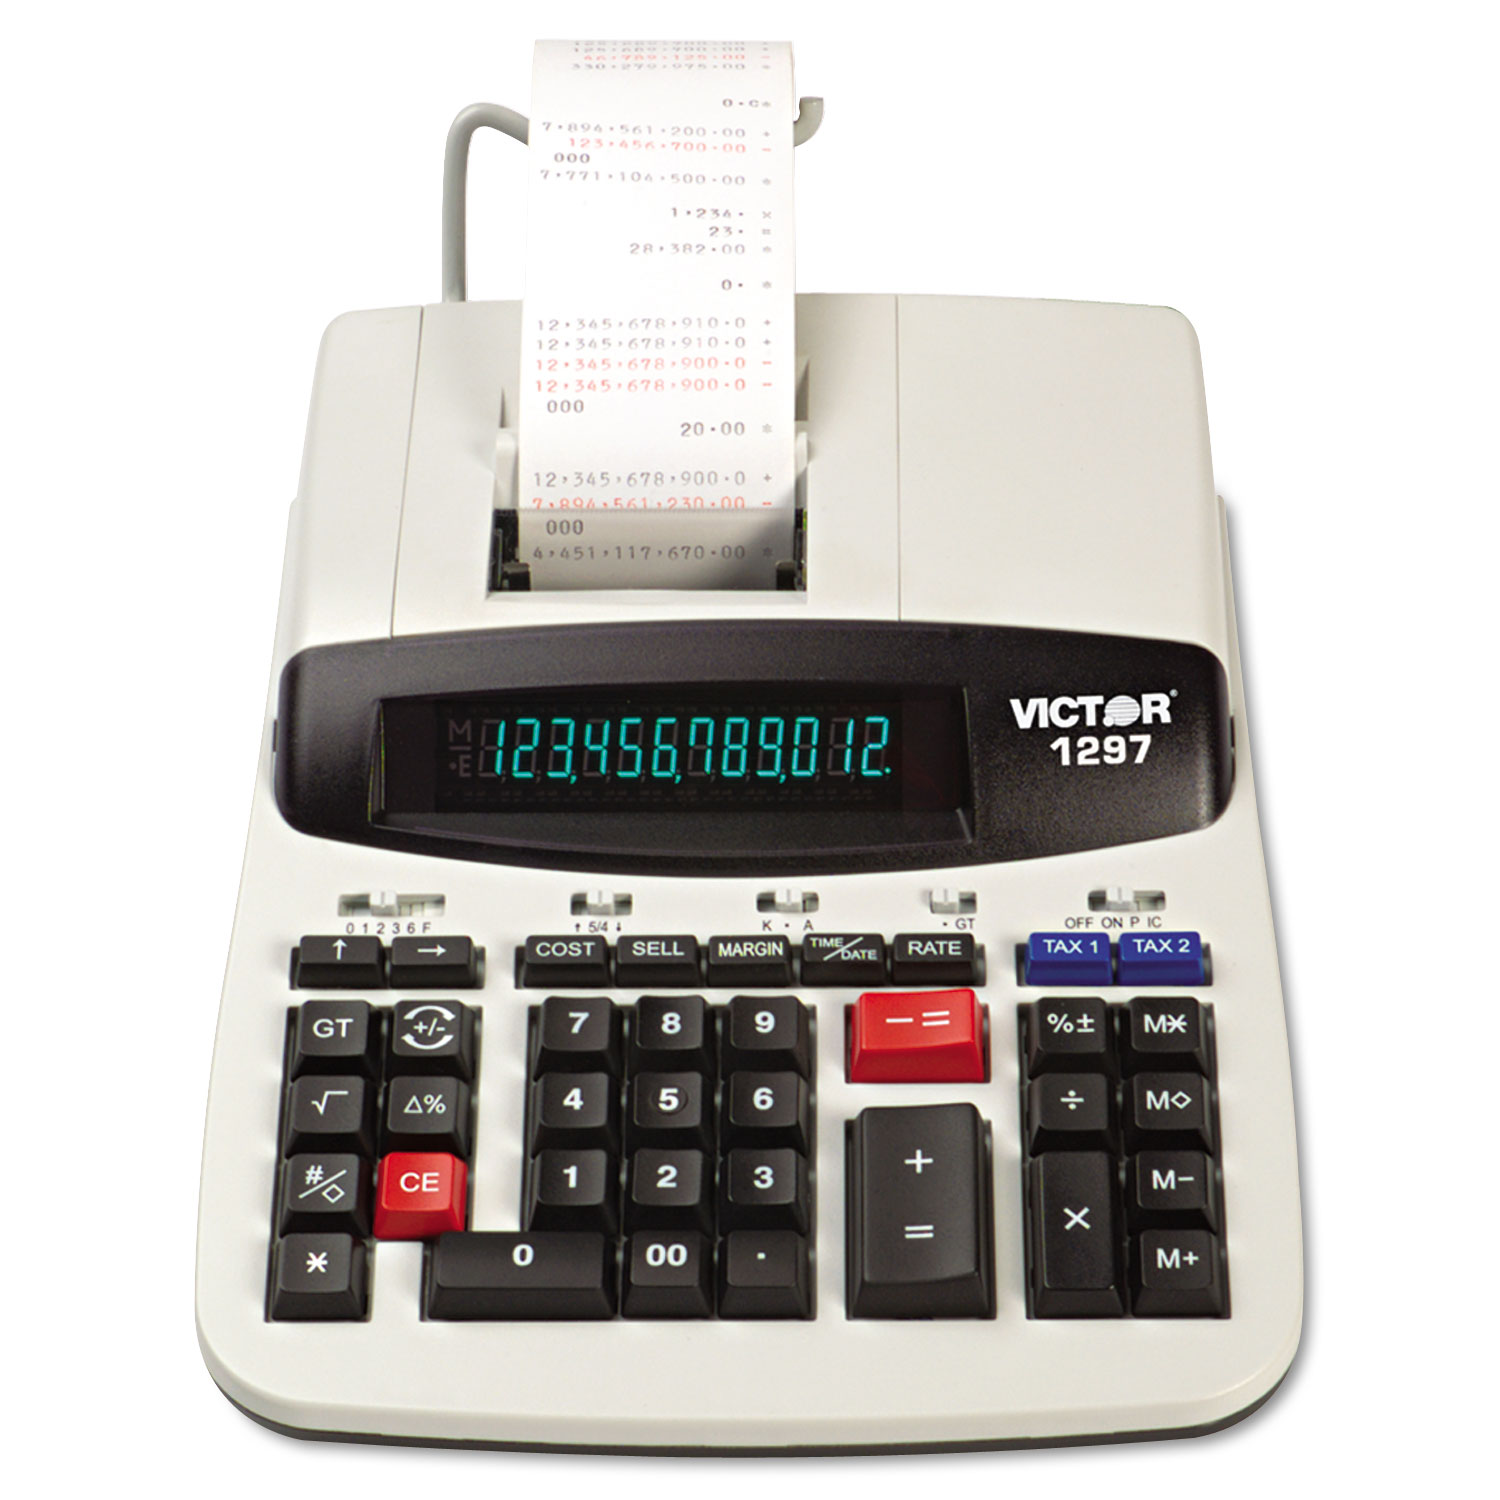  Victor 1297 1297 Two-Color Commercial Printing Calculator, Black/Red Print, 4 Lines/Sec (VCT1297) 